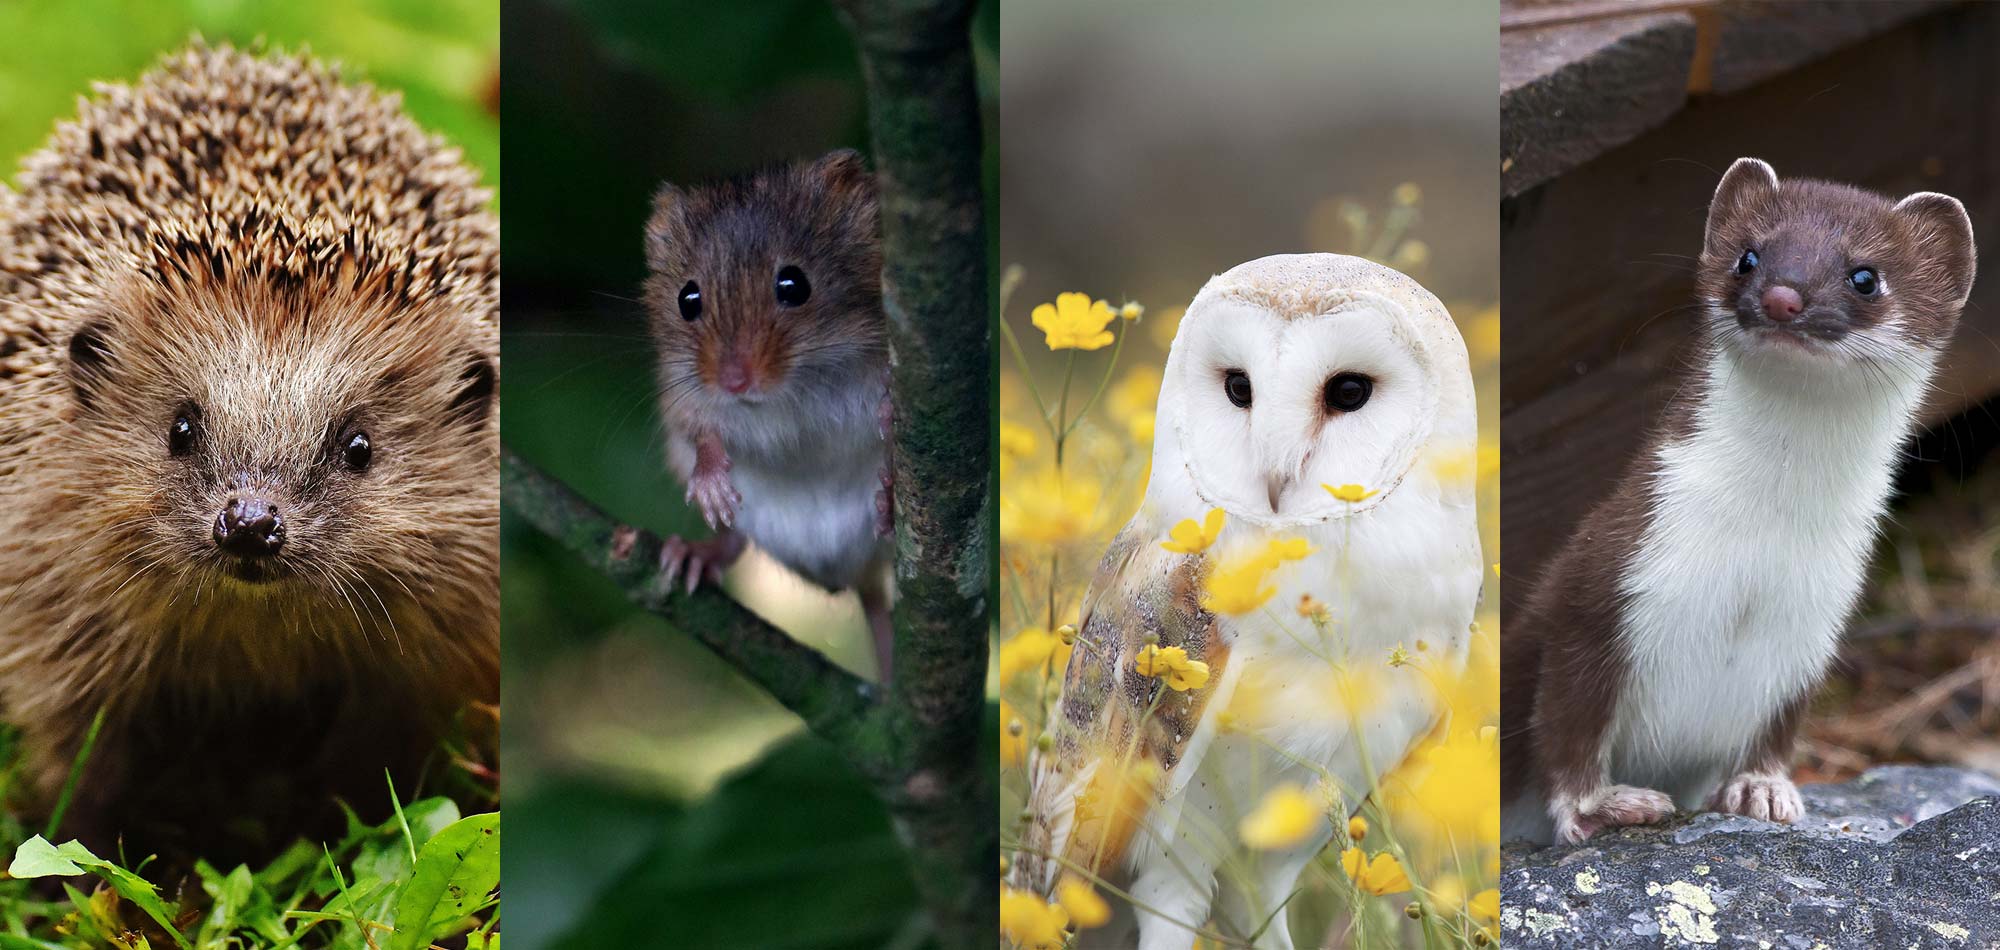 Traditional pest control can be very damaging for our wildlife